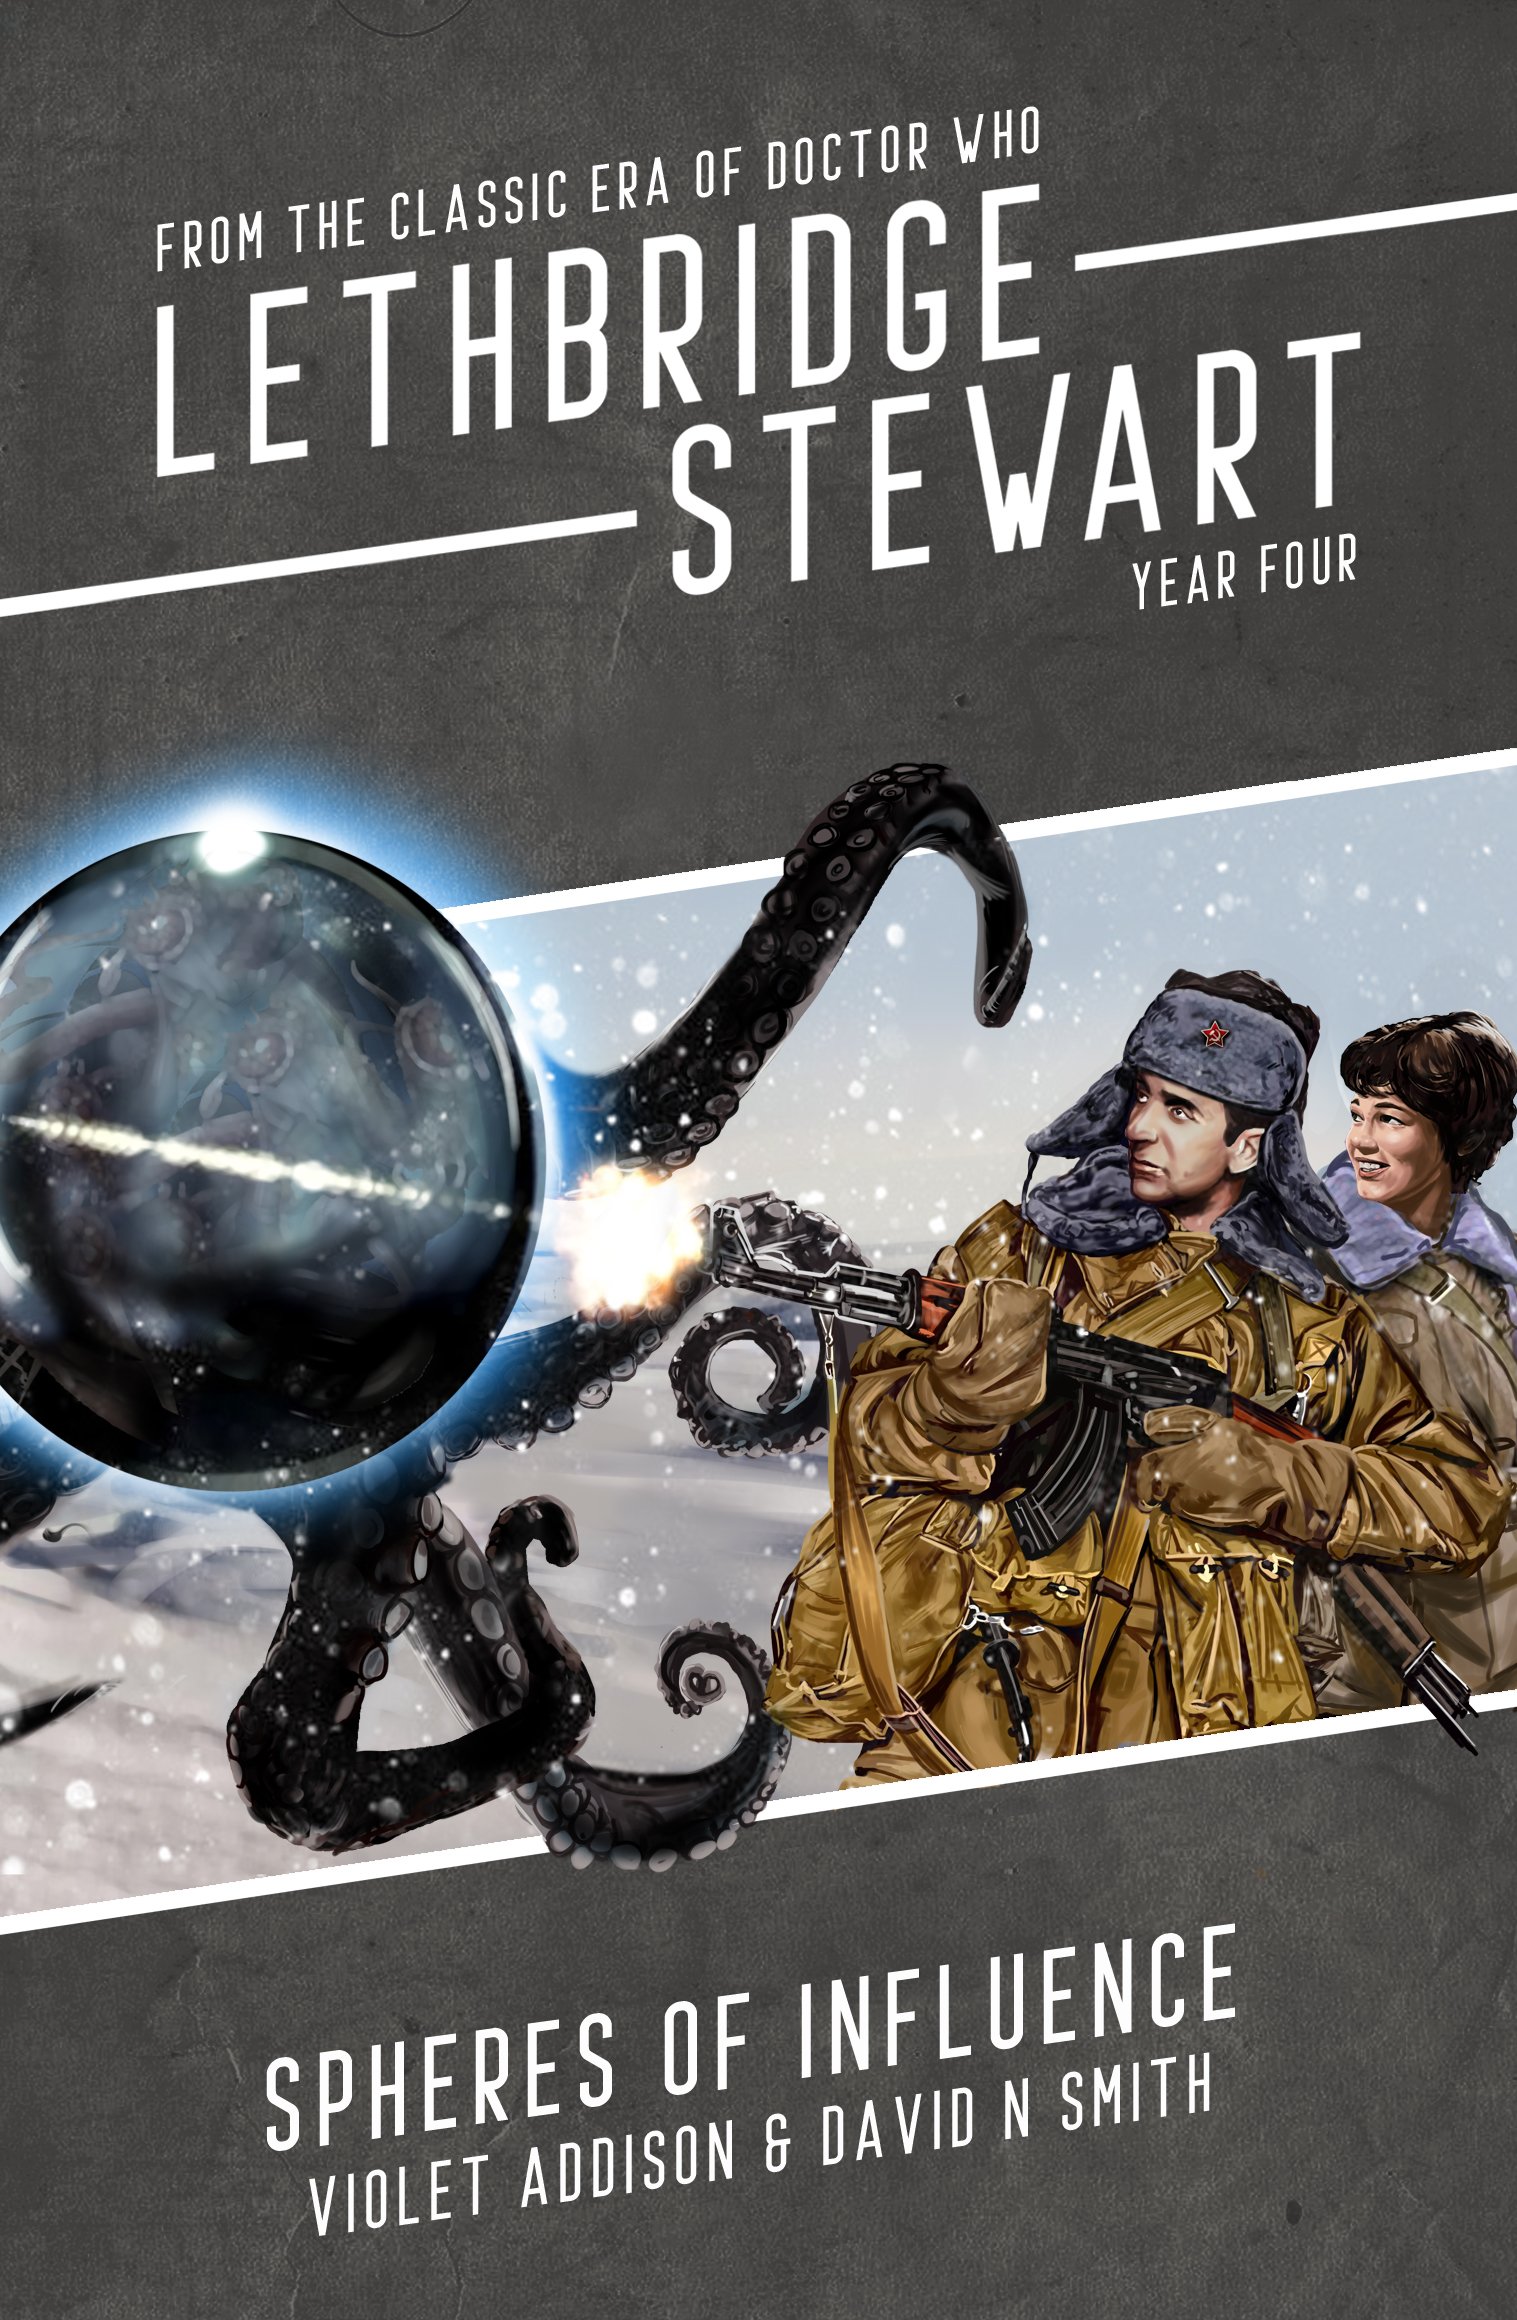 The Final Lethbridge-Stewart Series Begins with Spheres of Influence